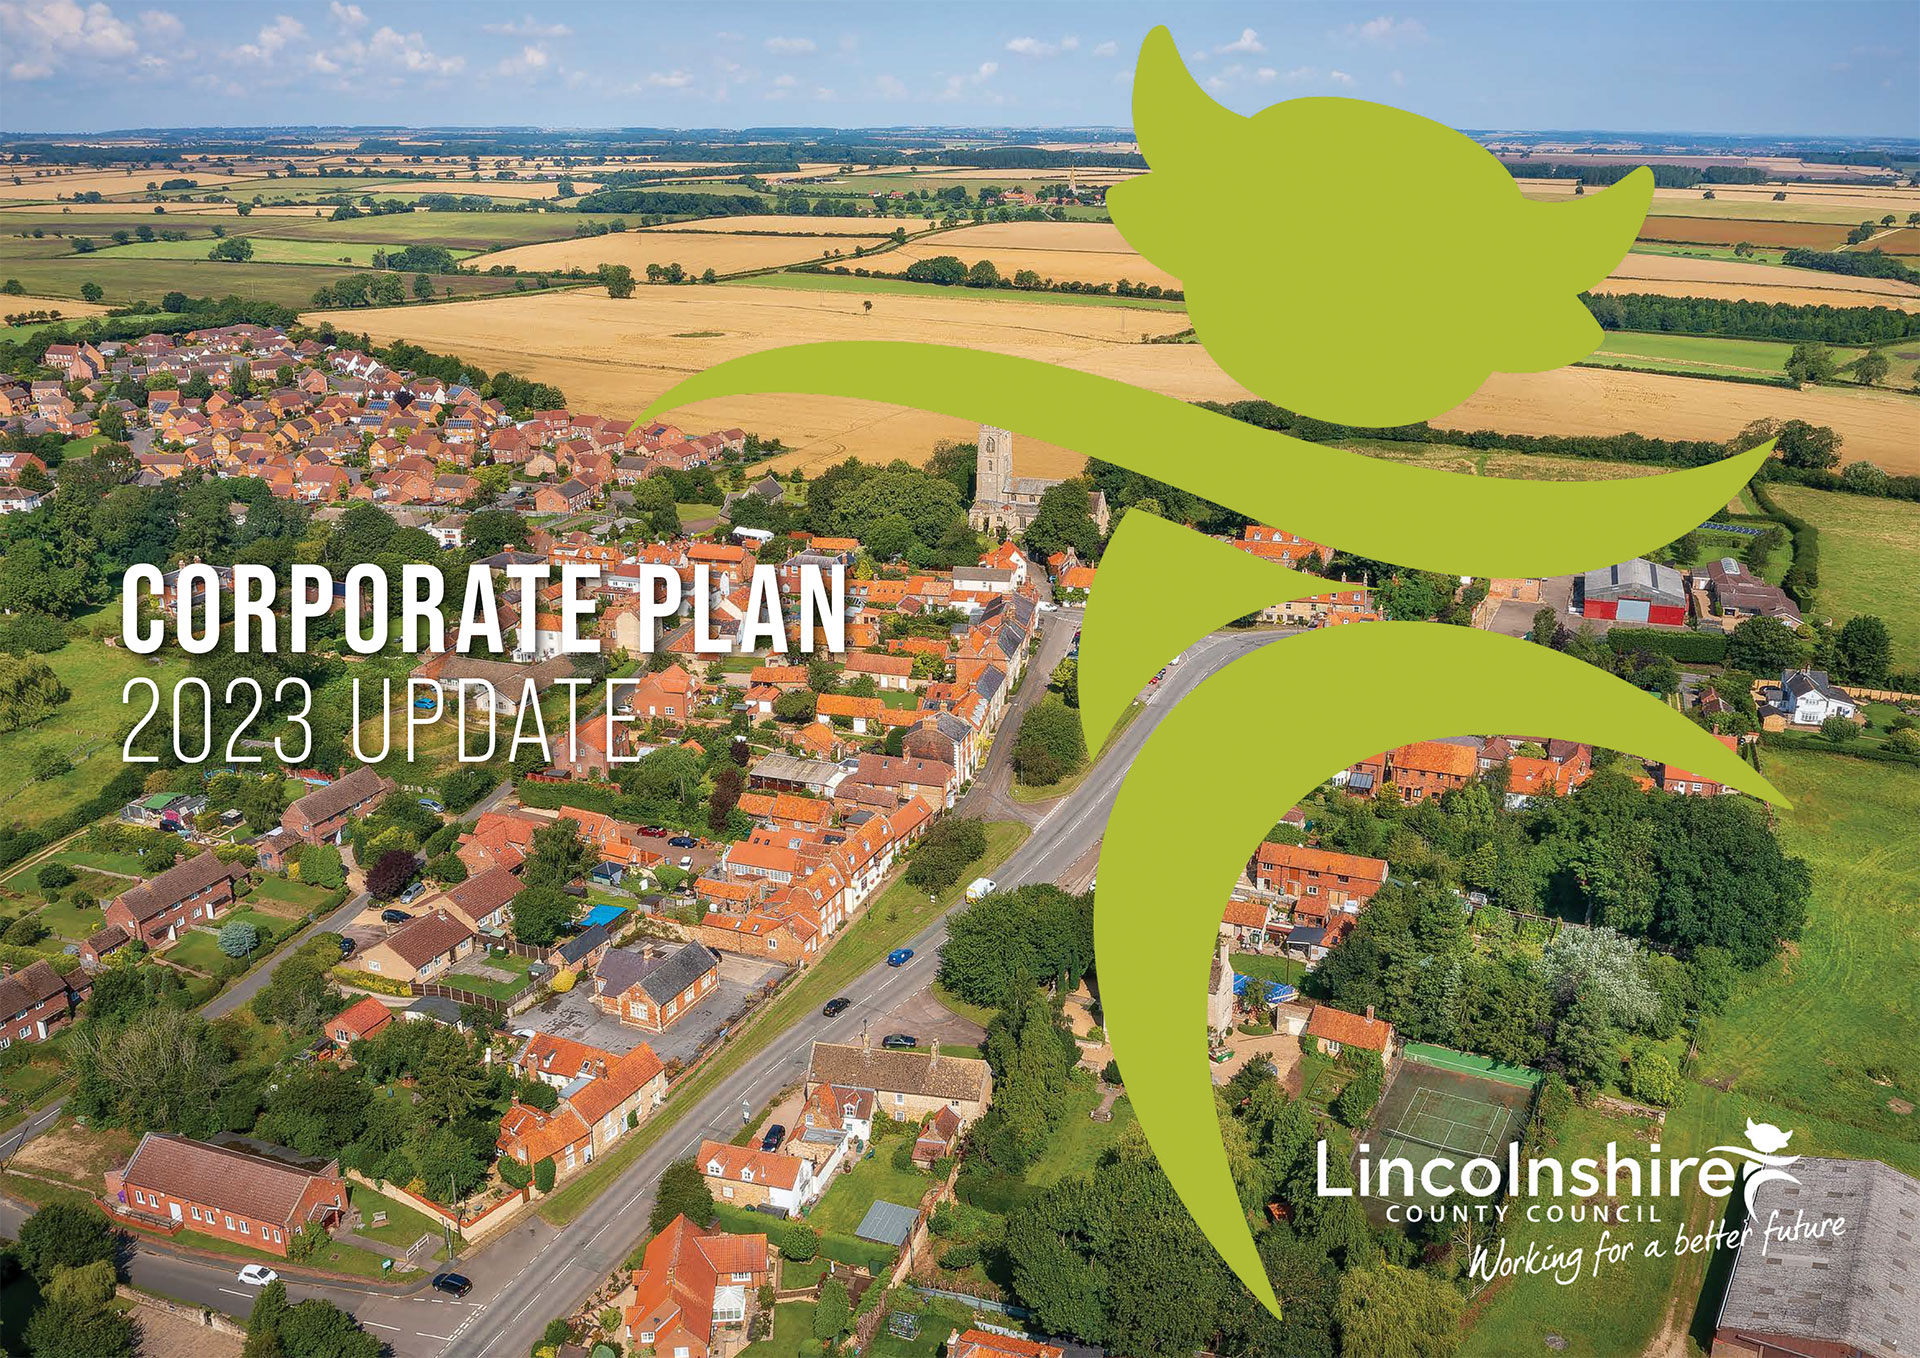 Corporate plan cover image of the LCC Imp with an aerial view of Lincolnshire in the background.